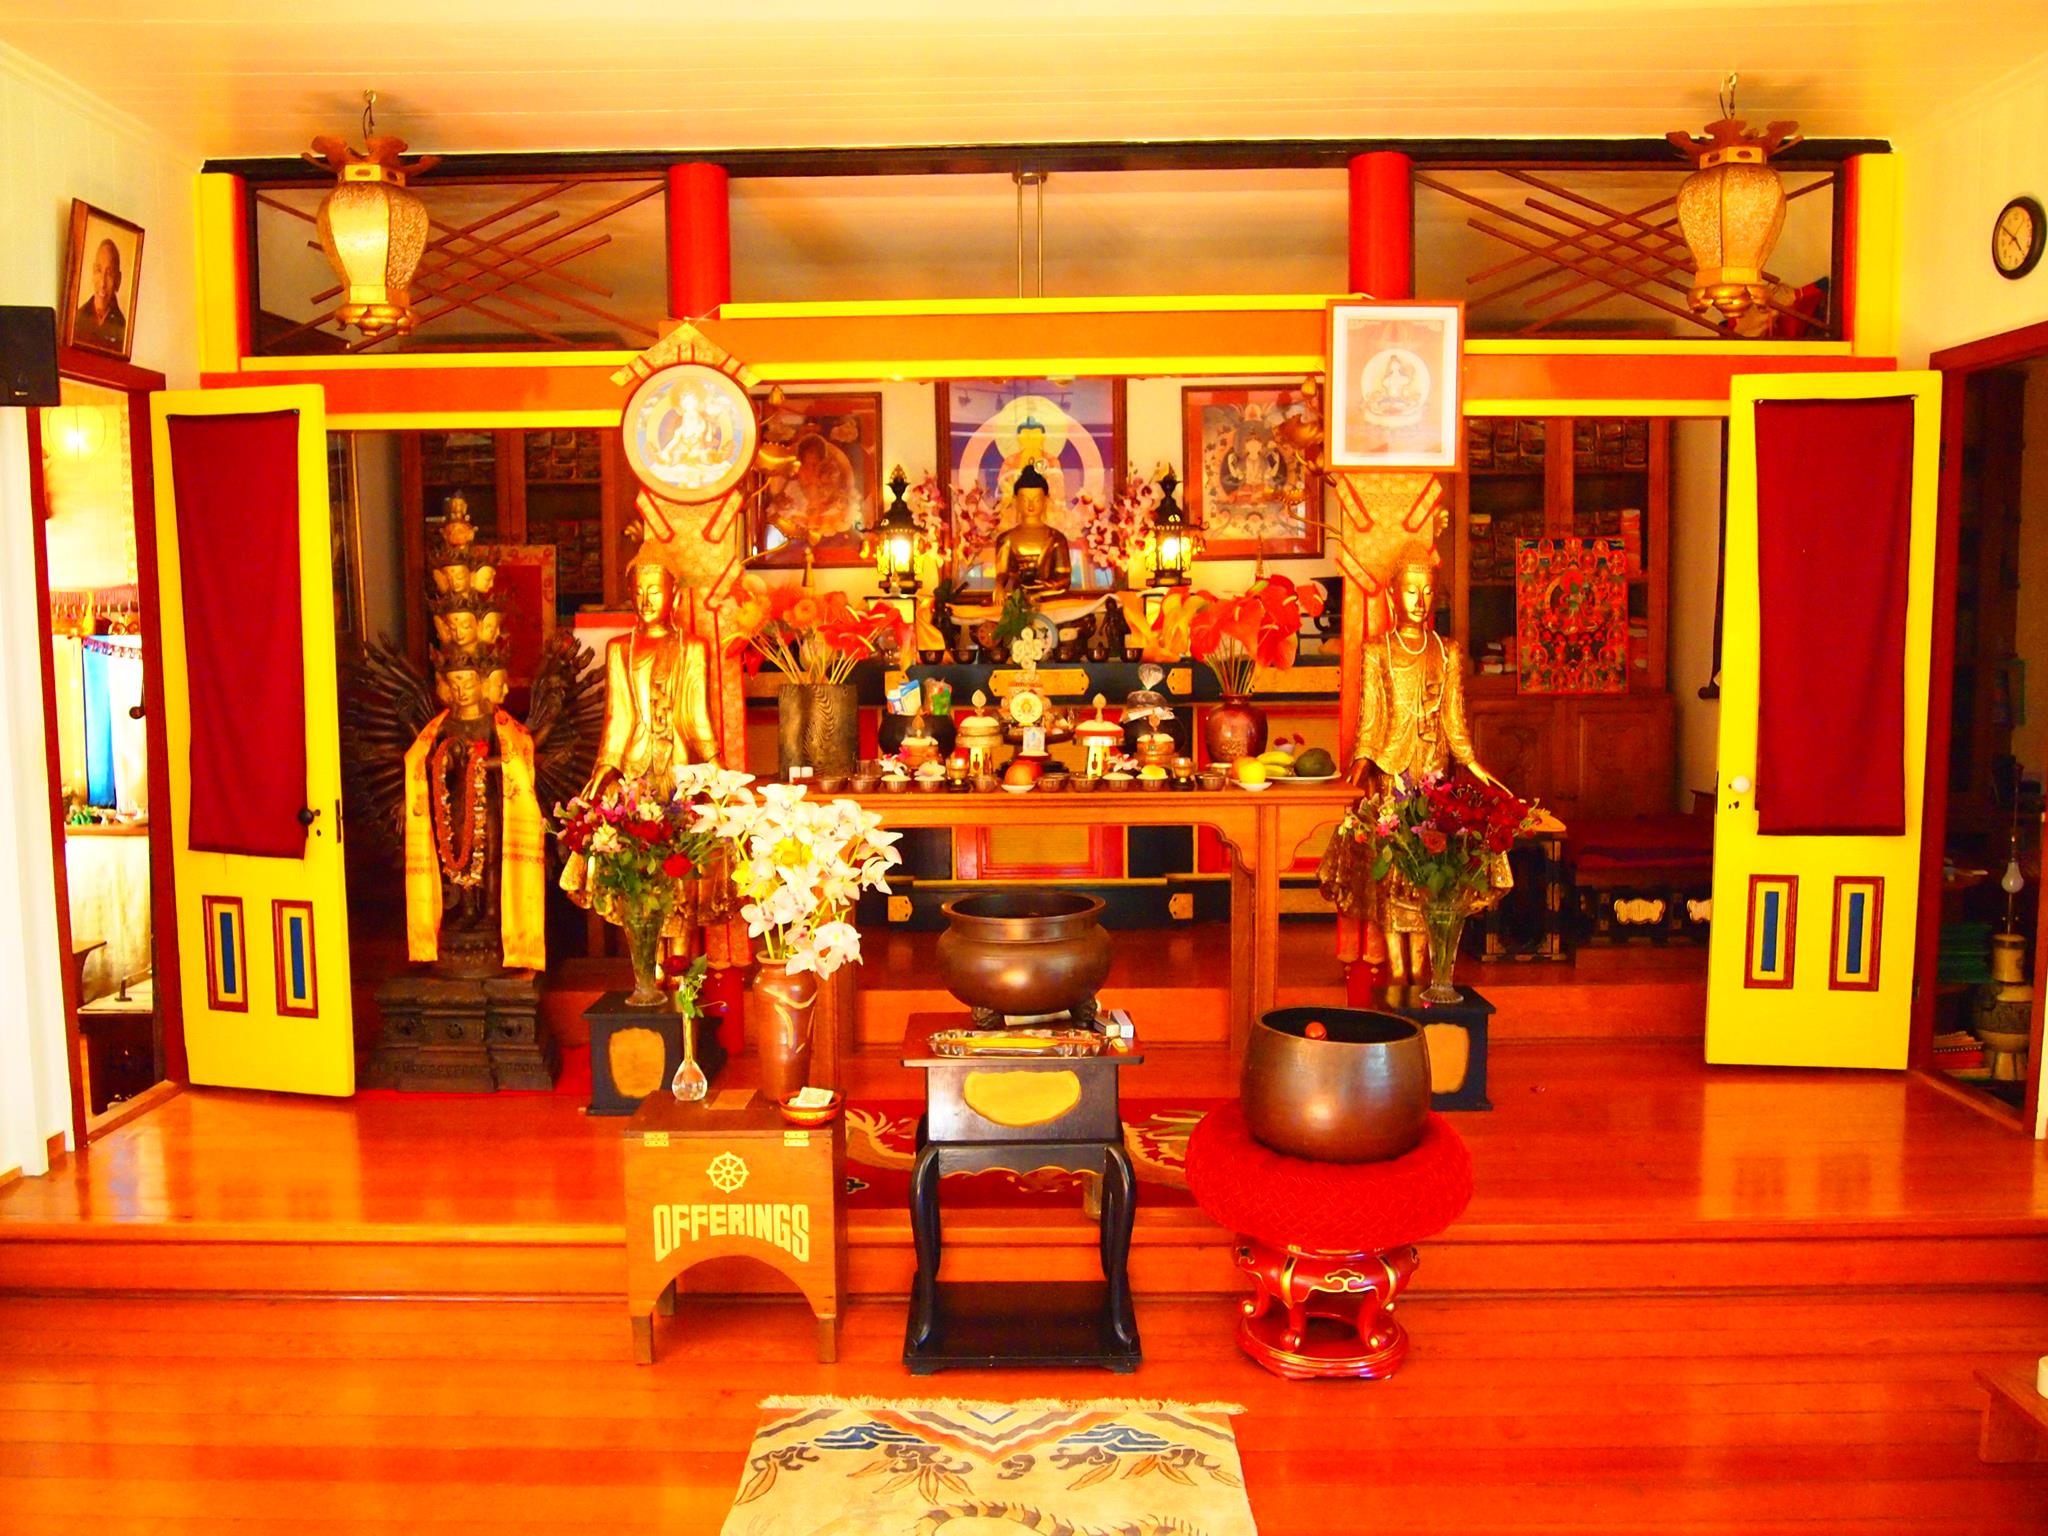 Nechung Dorje Drayang Ling Buddhist Temple Image